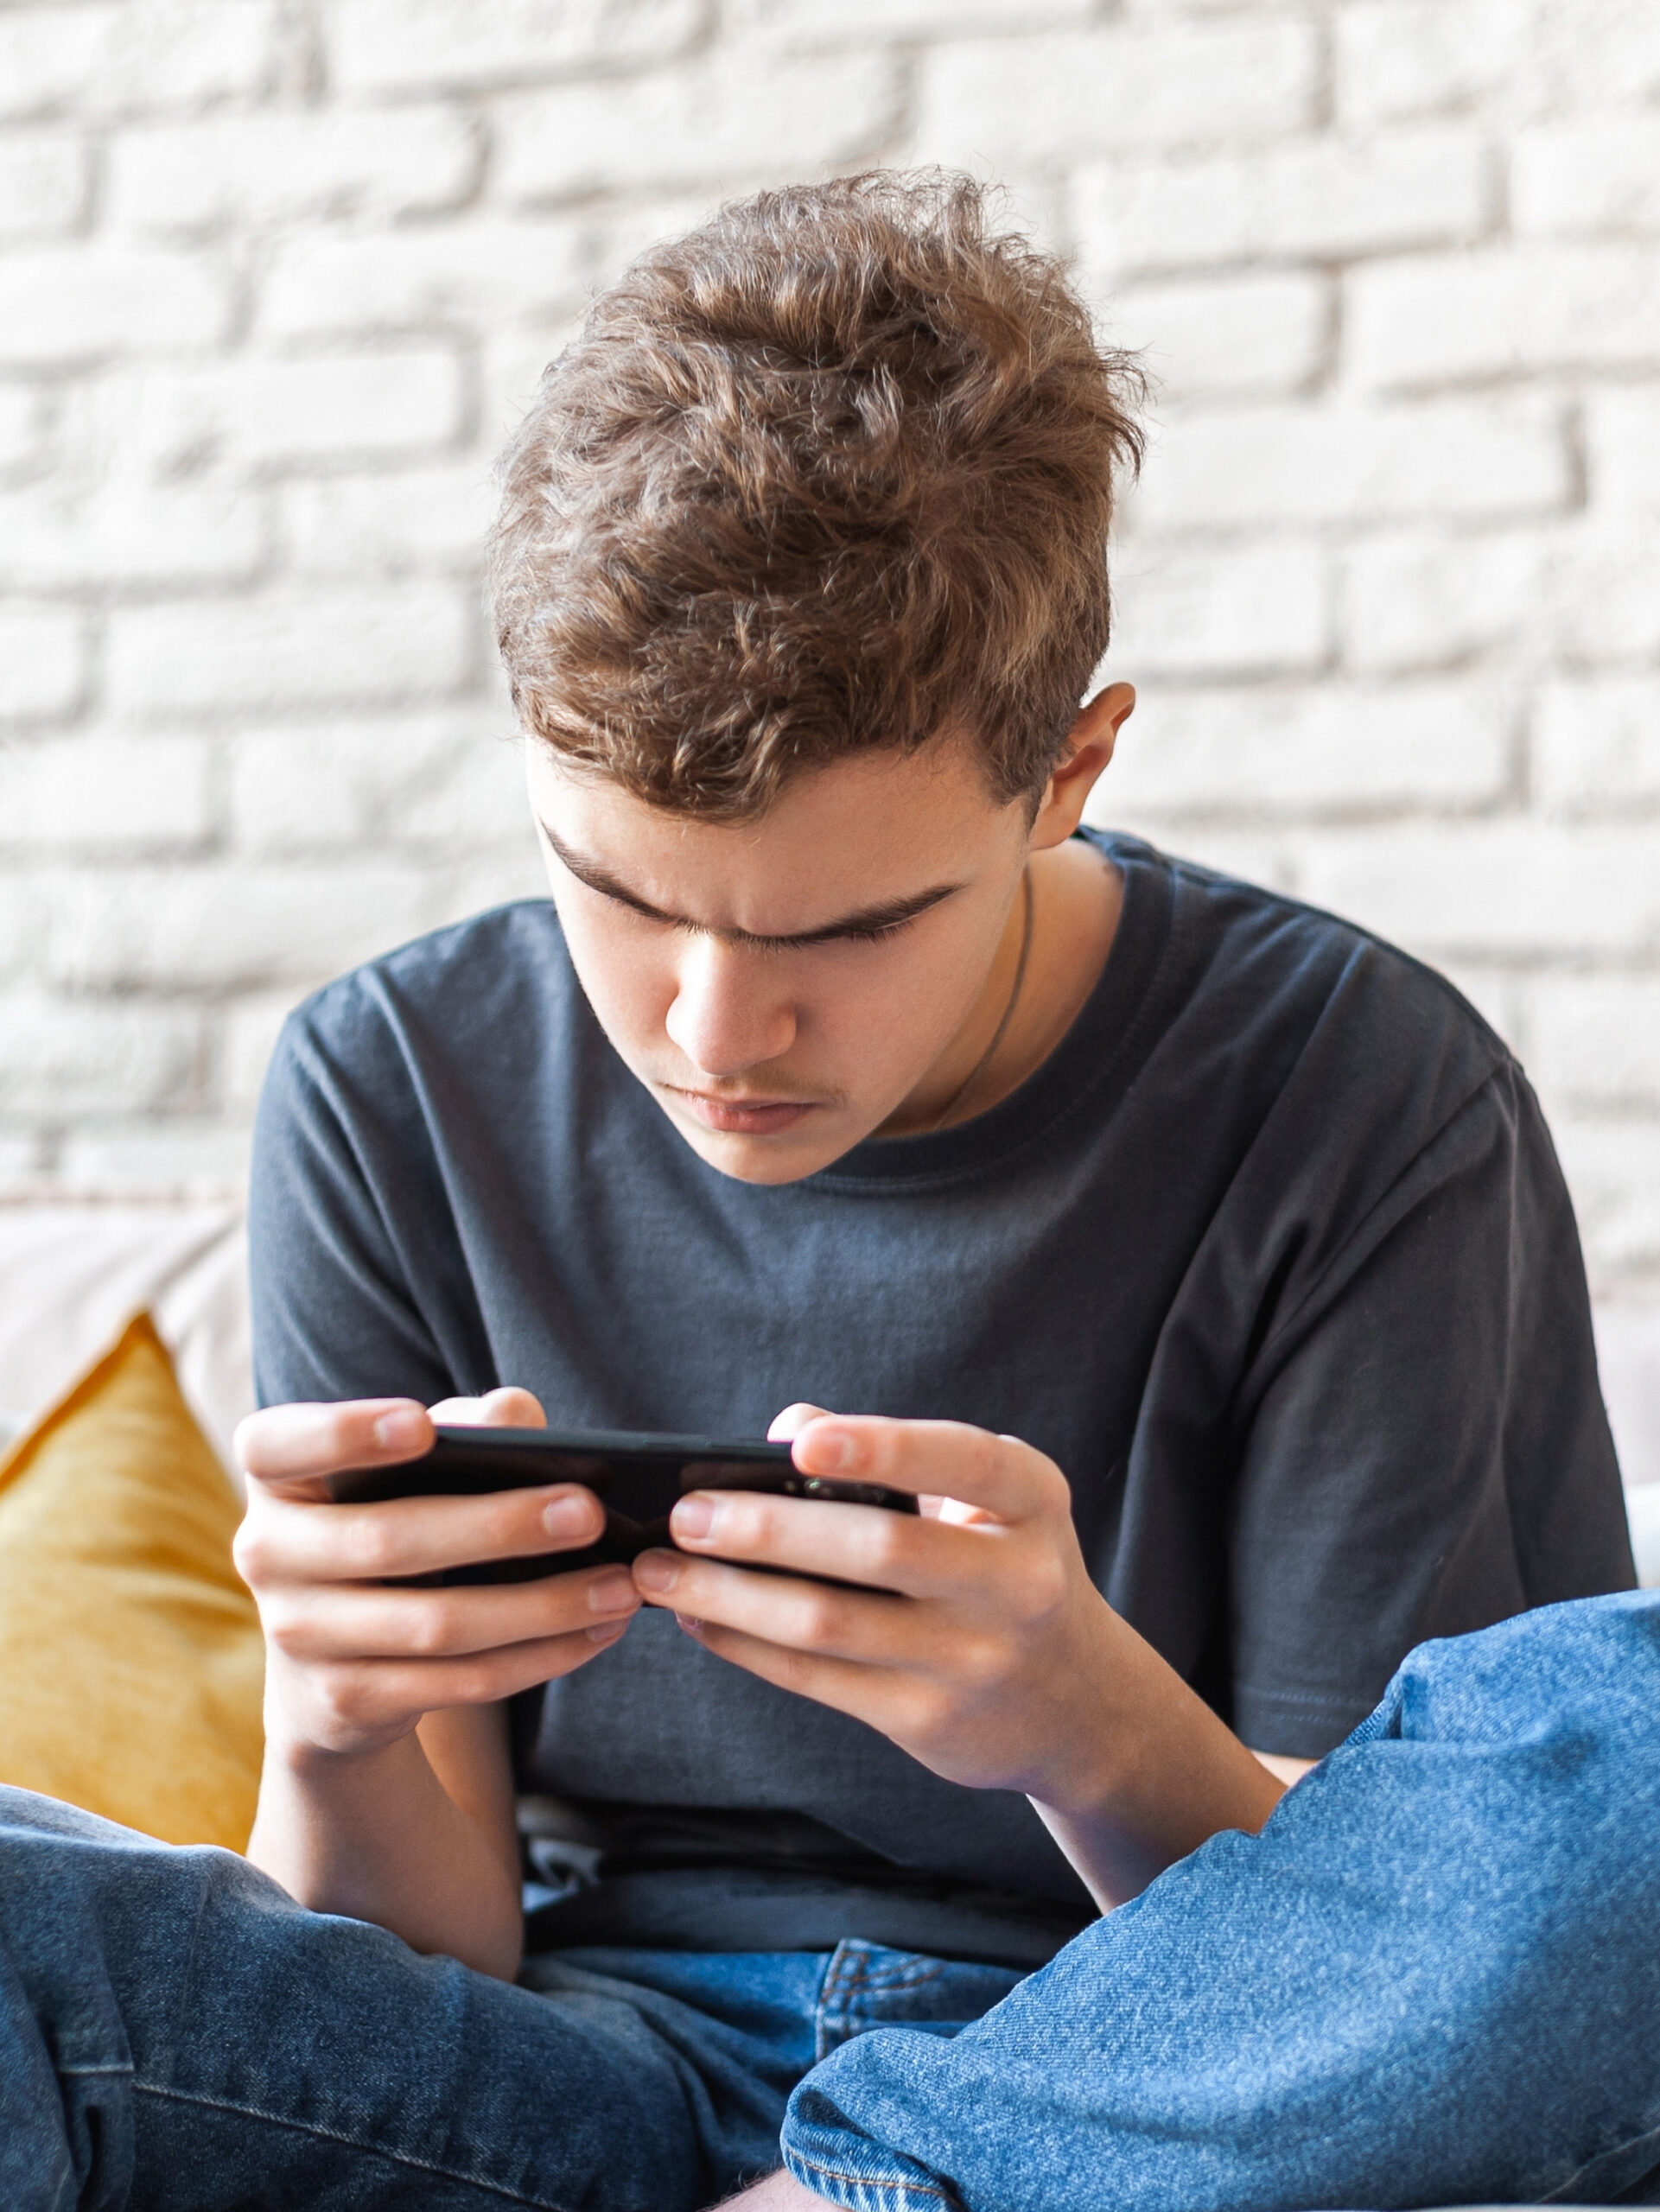 Tips for teens and parents when there is upsetting news on social media